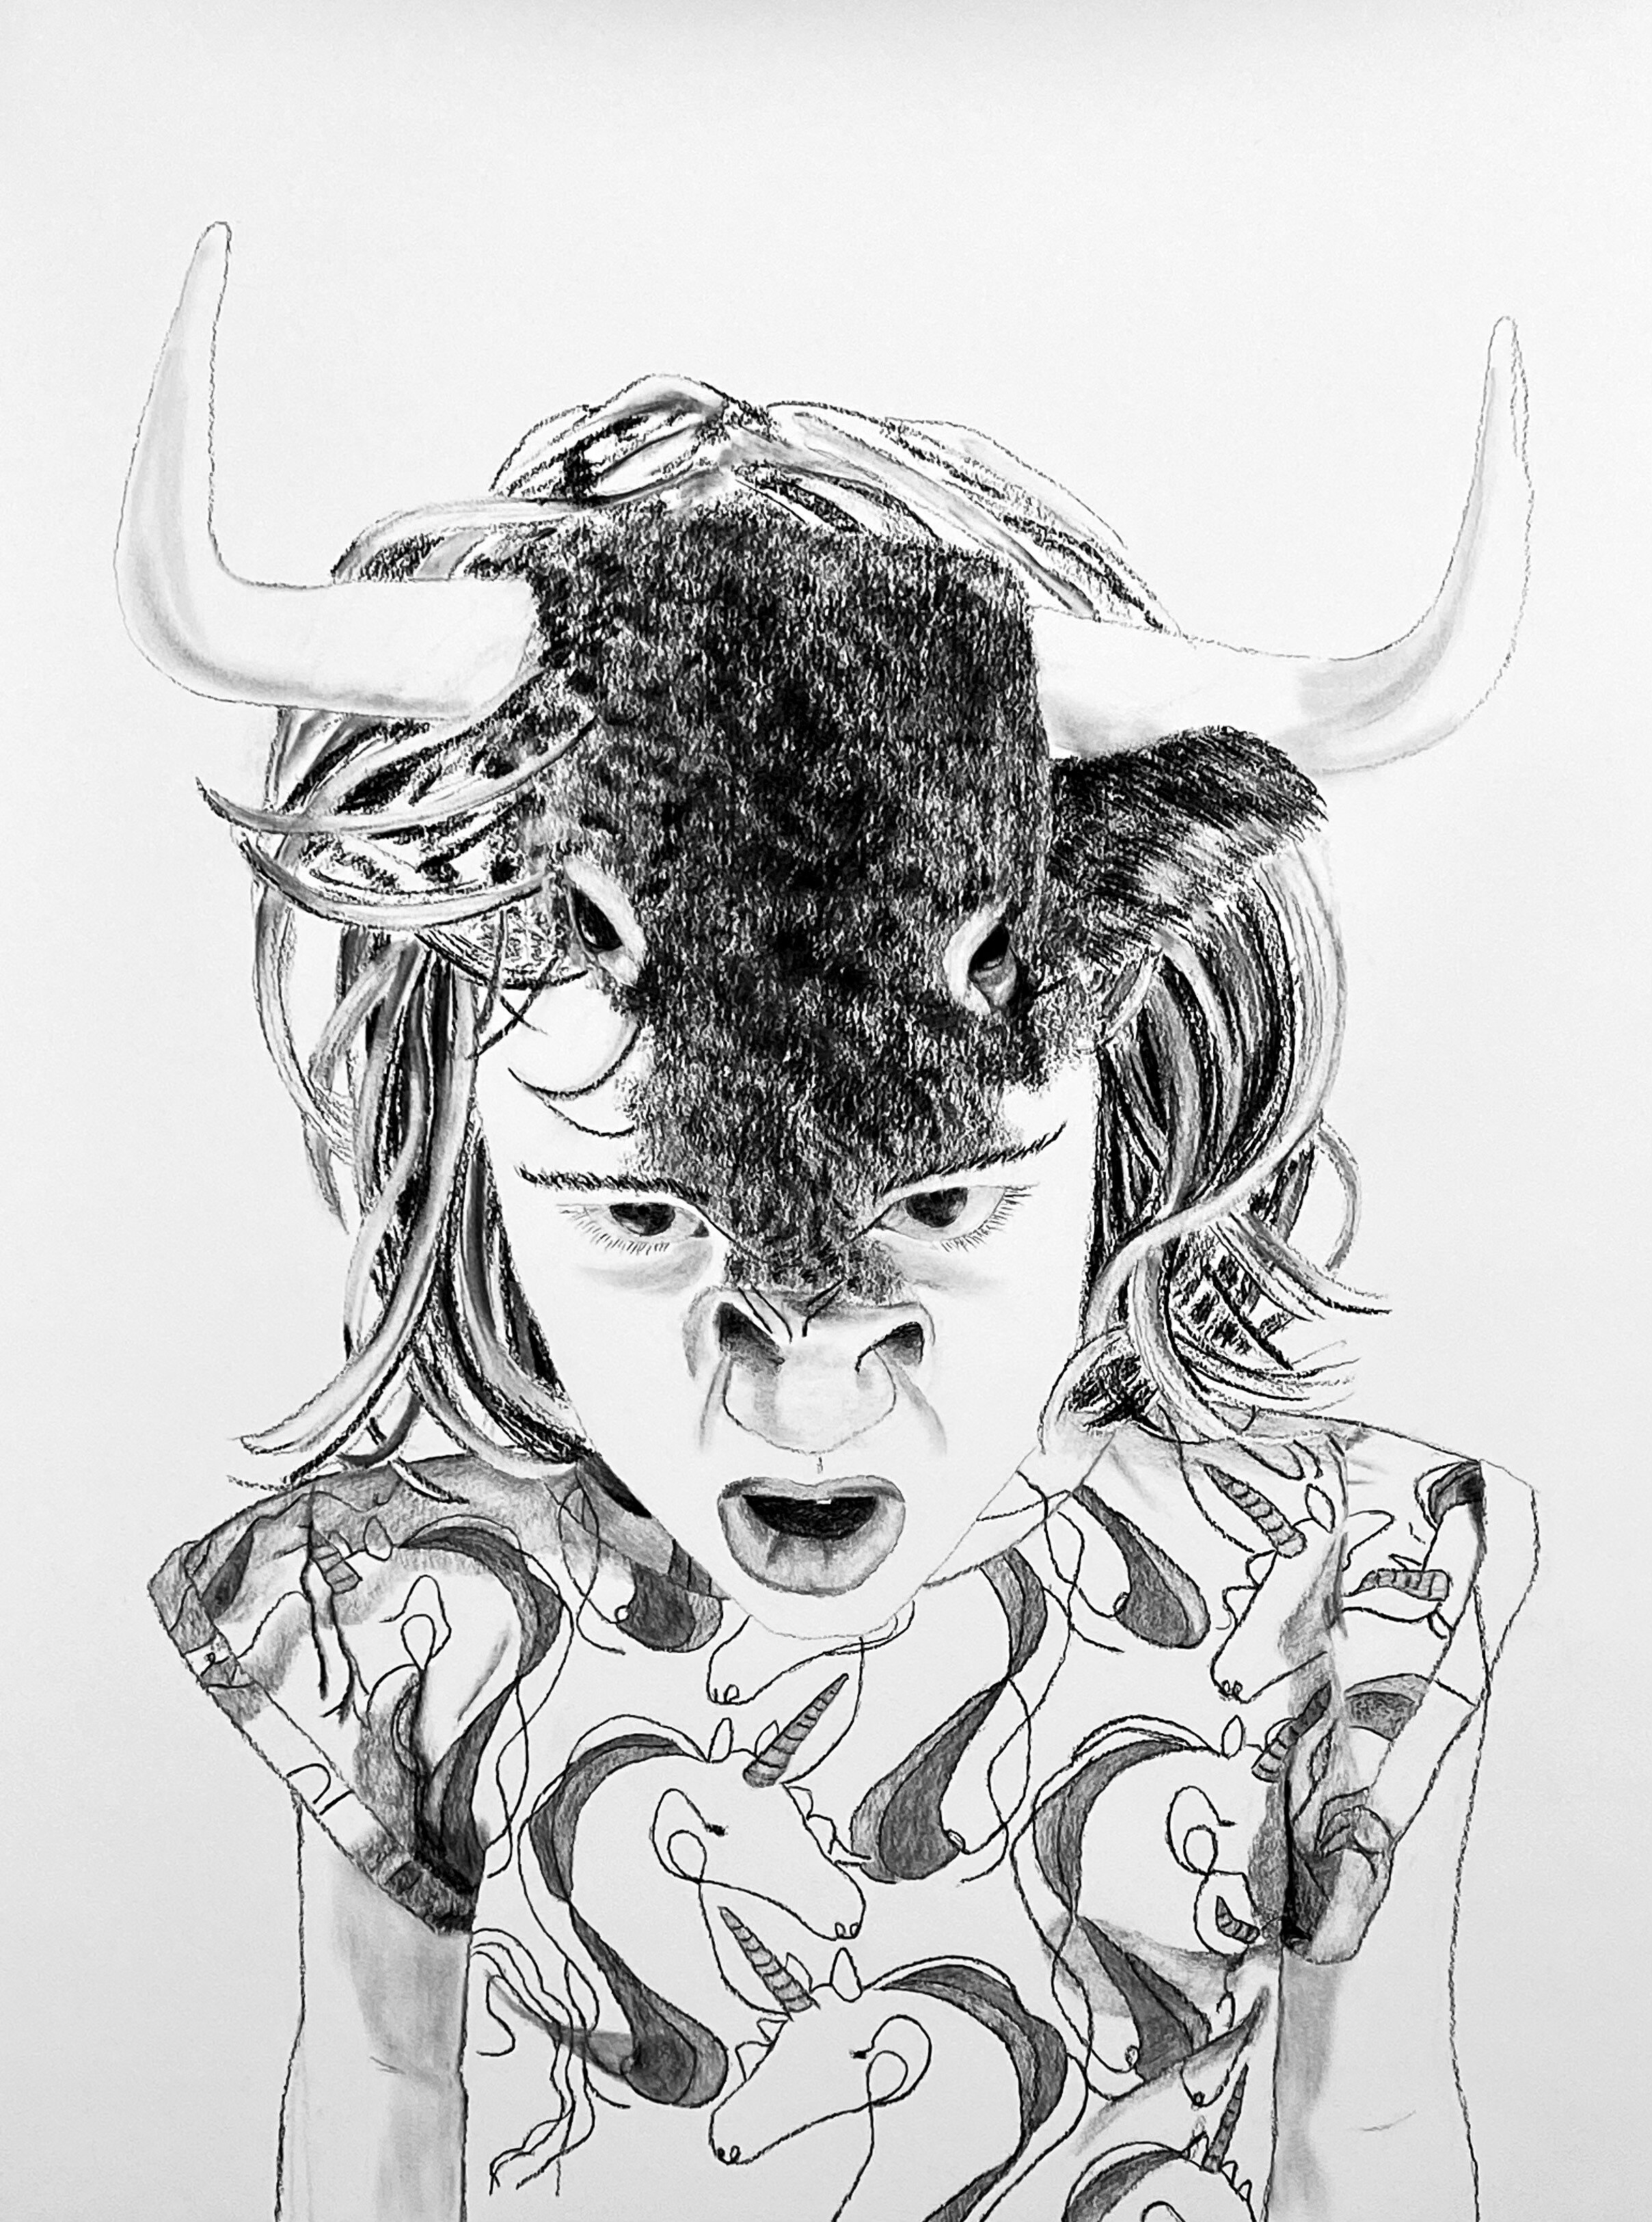   Untitled II (Kid Monster) , charcoal on paper, 30”x 38”, 2020 